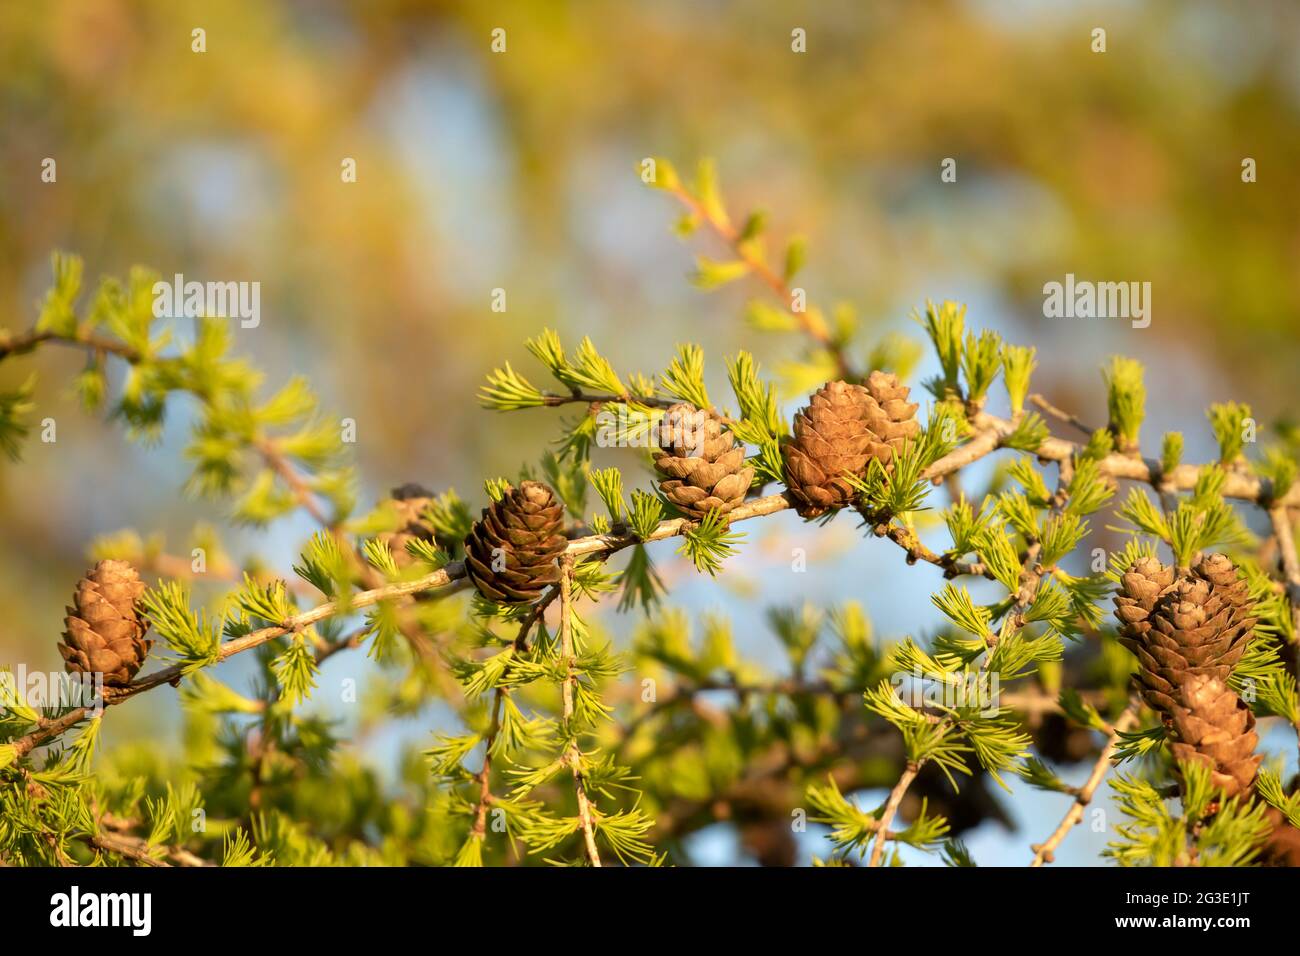 Cones and fresh needles on branches of  Siberian larch (Larix sibirica) in golden evening sunset light Stock Photo